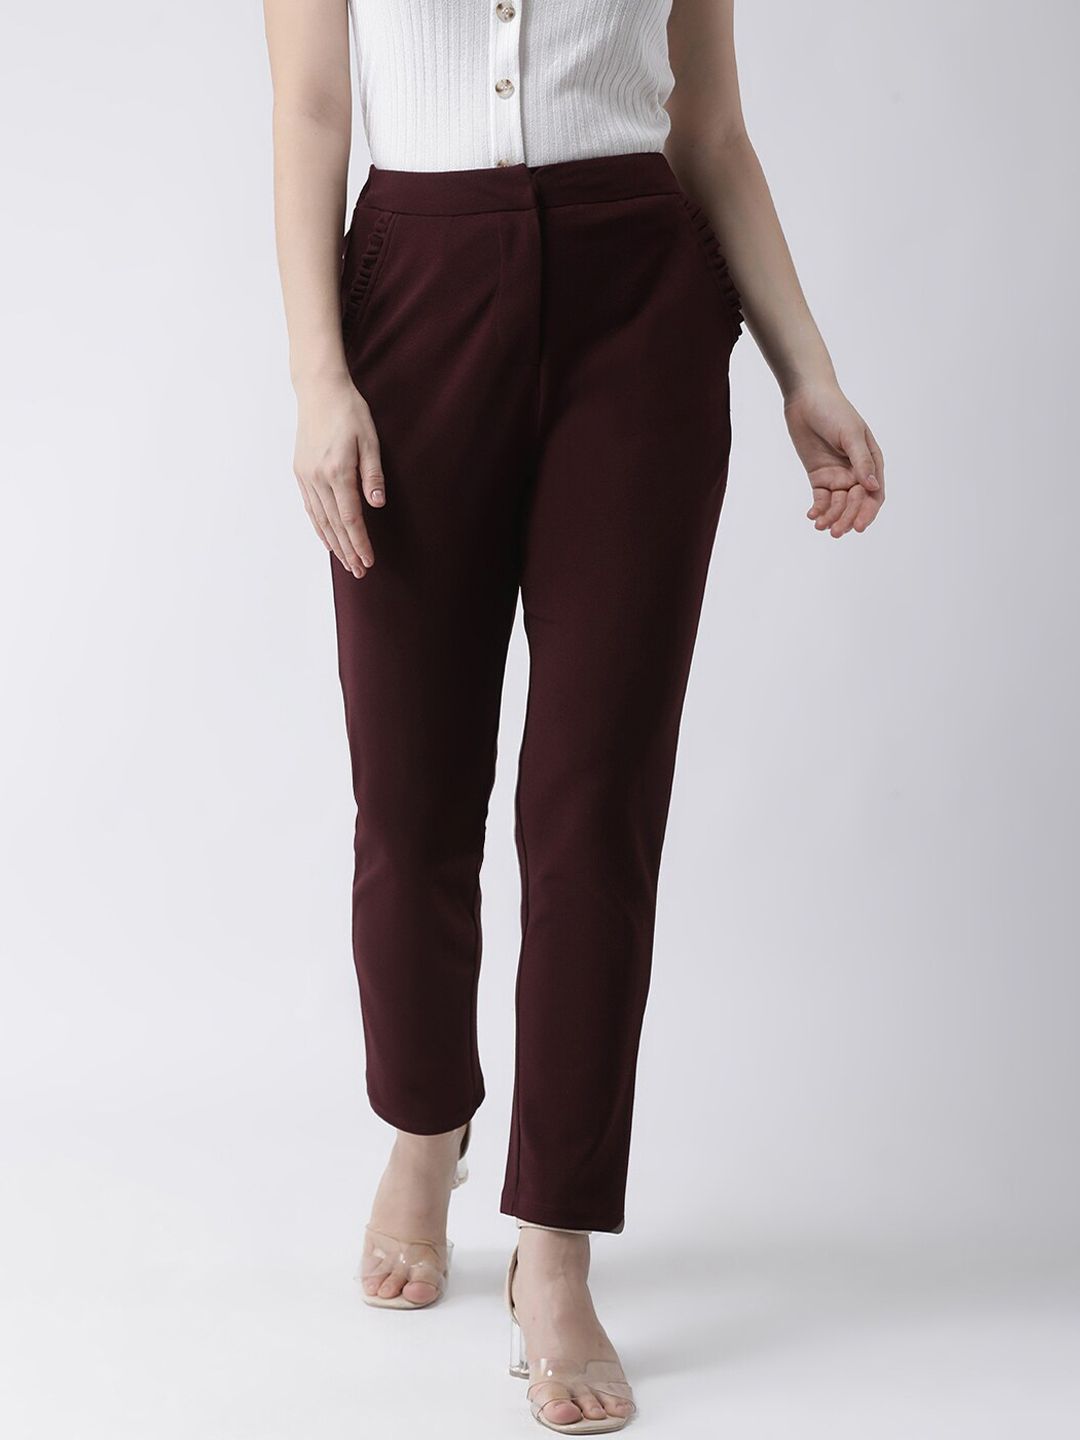 KASSUALLY Women Maroon Regular Fit Solid Regular Trousers Price in India